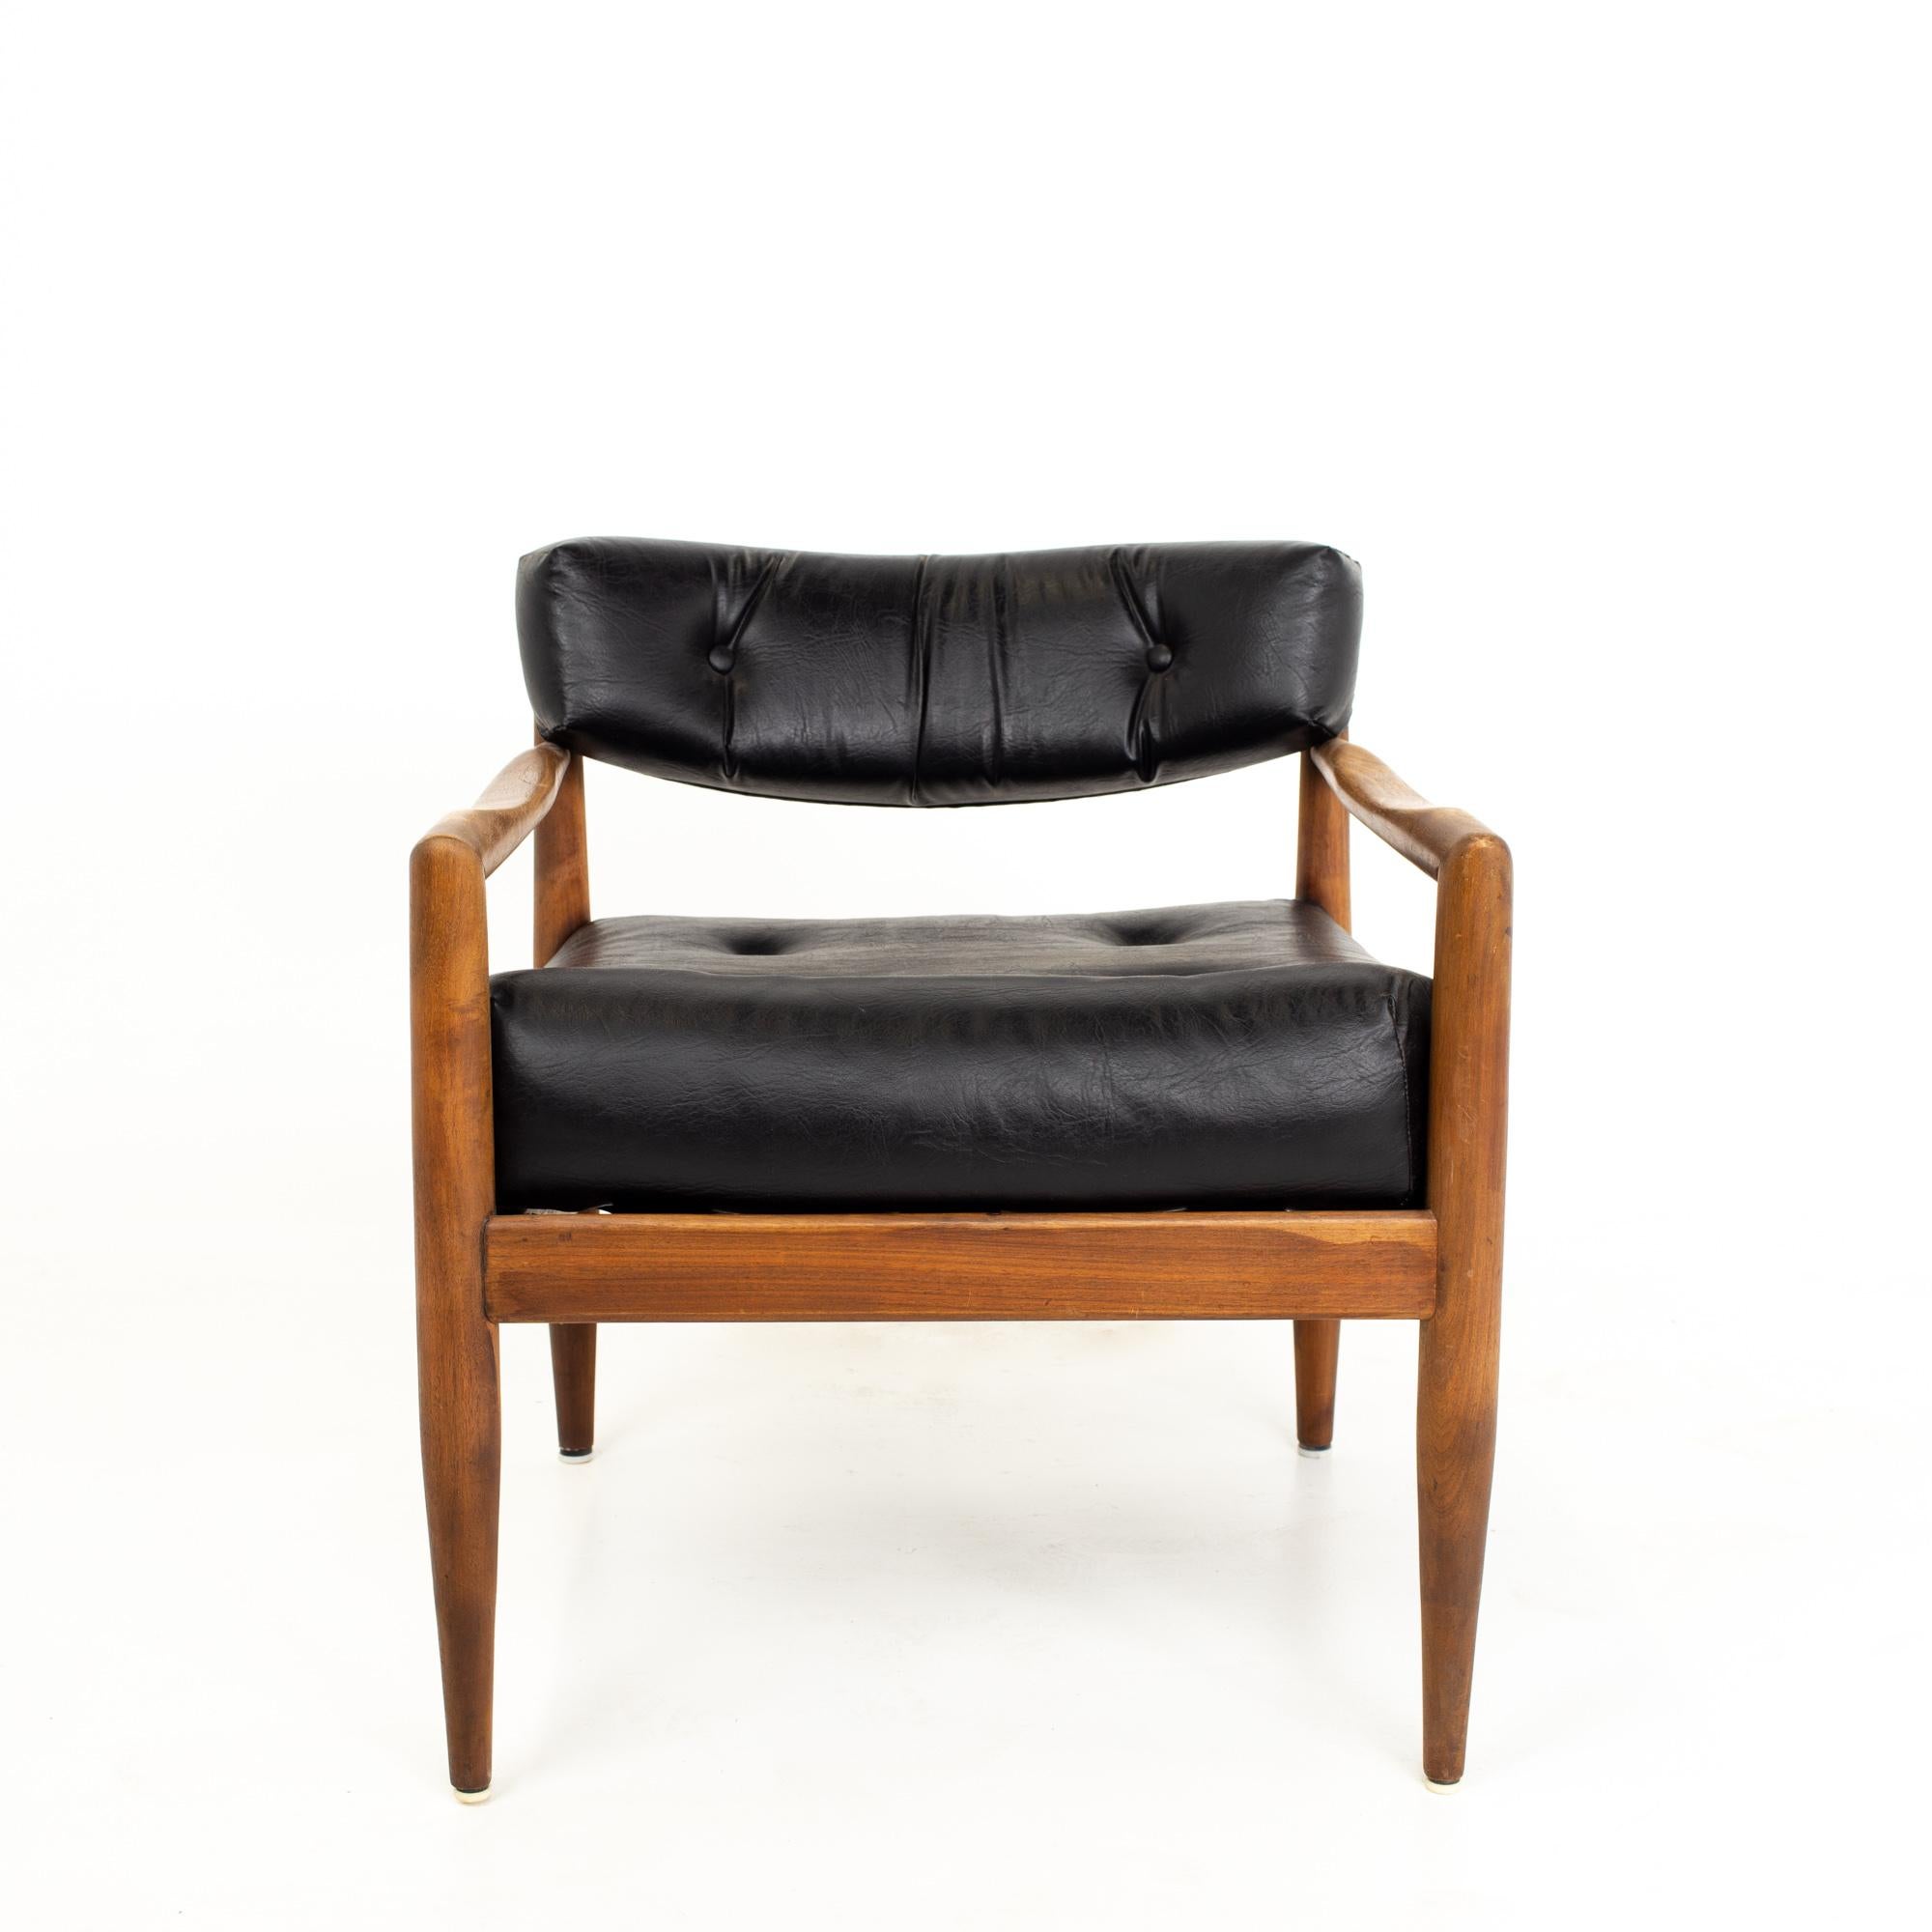 Adrian Pearsall Mid Century walnut occasional lounge chair
Chair measures: 24 wide x 28.5 deep x 27 high, with a seat height of 18.5 inches  

Each piece of furniture is available in what we call restored vintage condition. Upon purchase it is